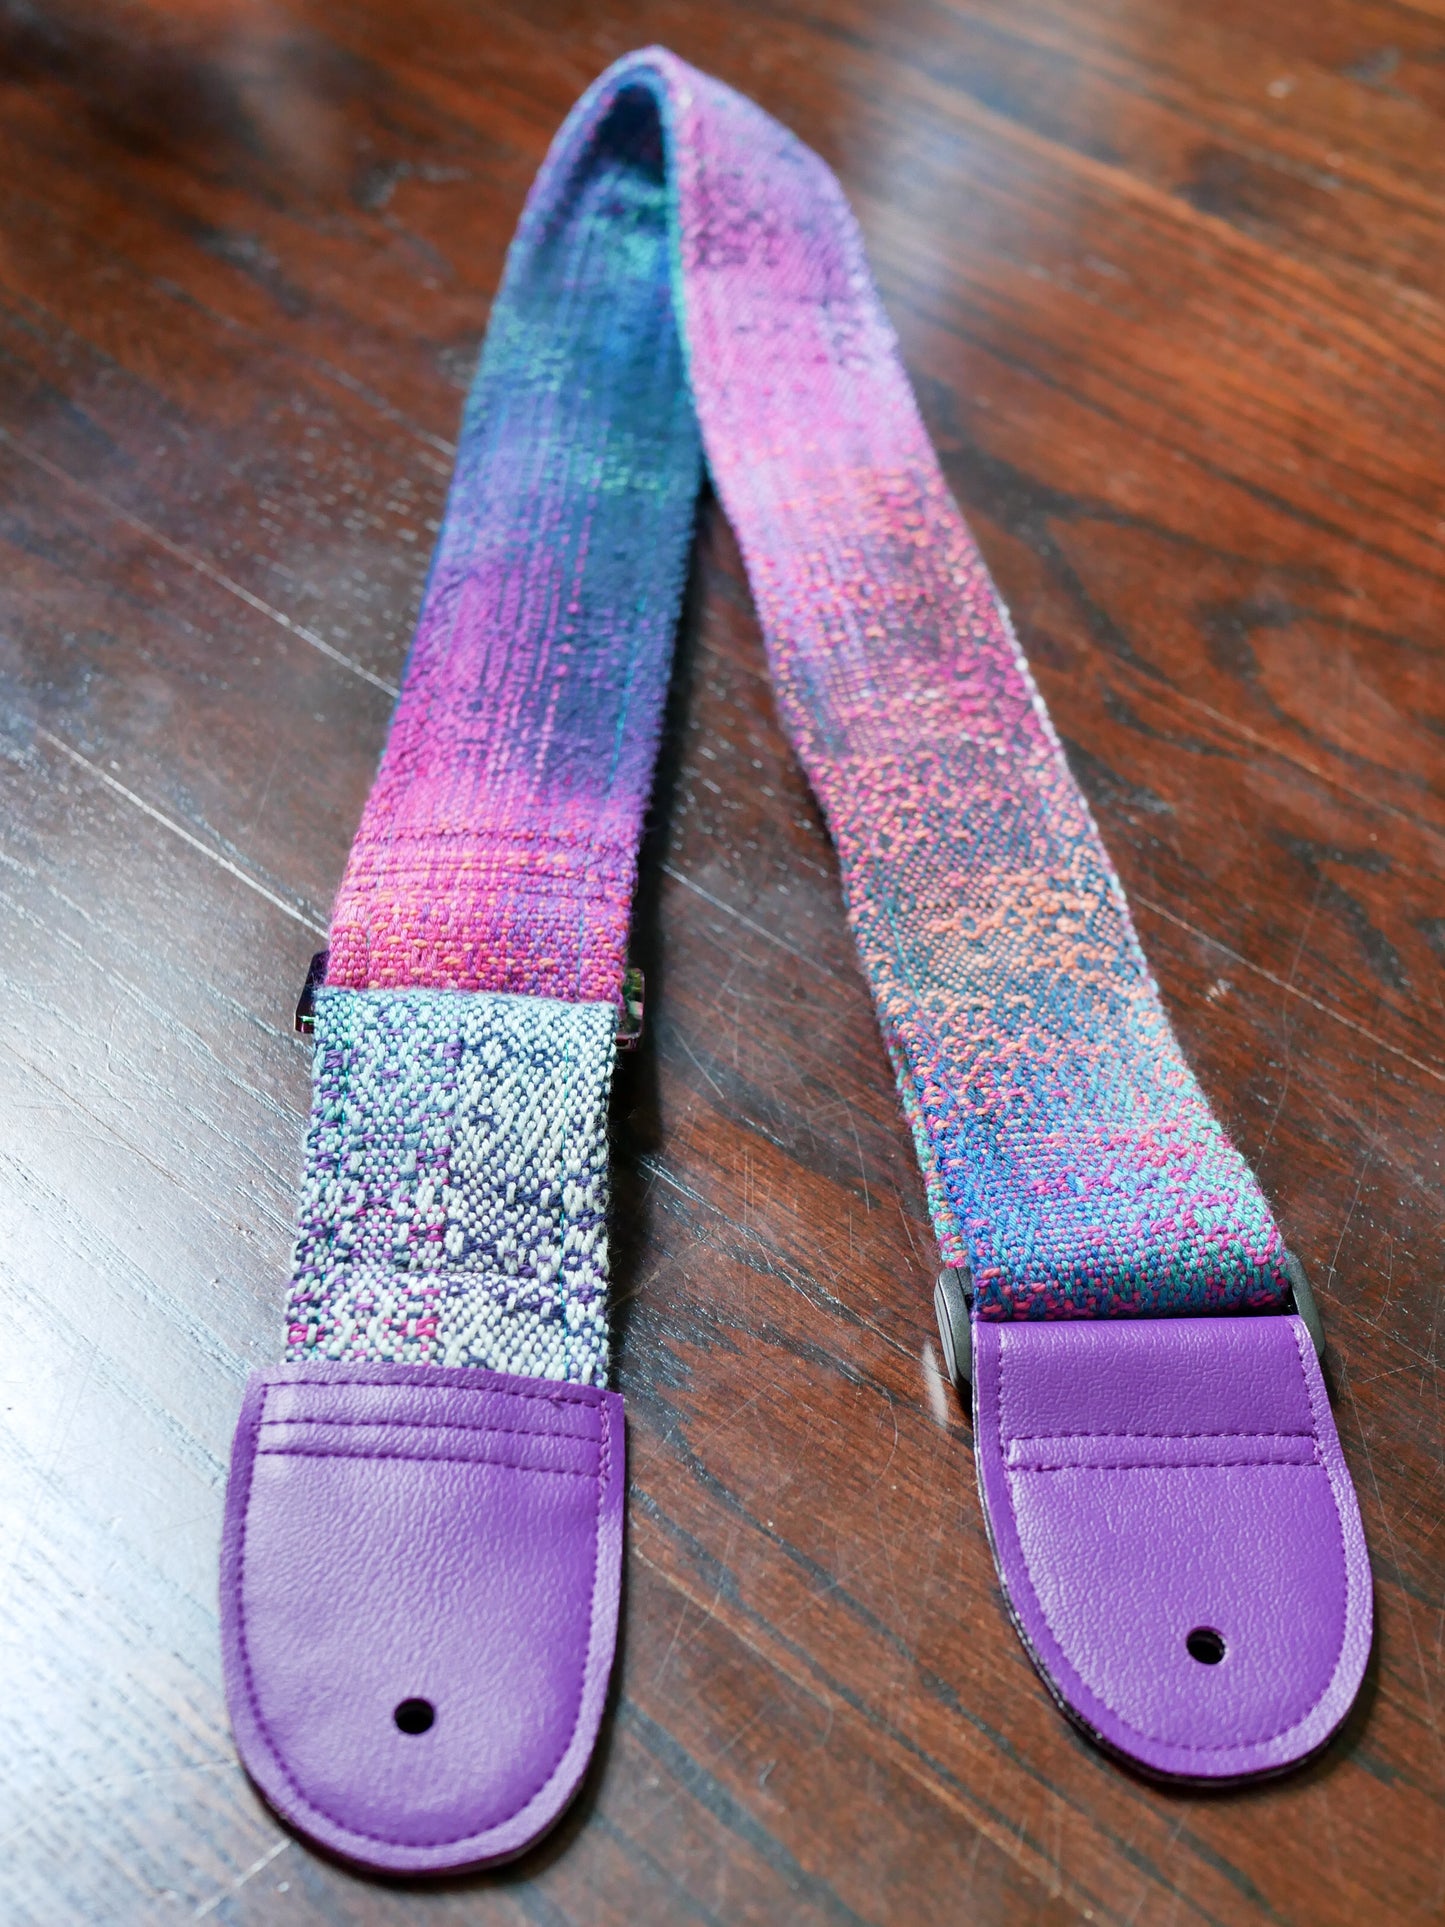 Handwoven Guitar Straps - Surfin' Cow - Free US Shipping